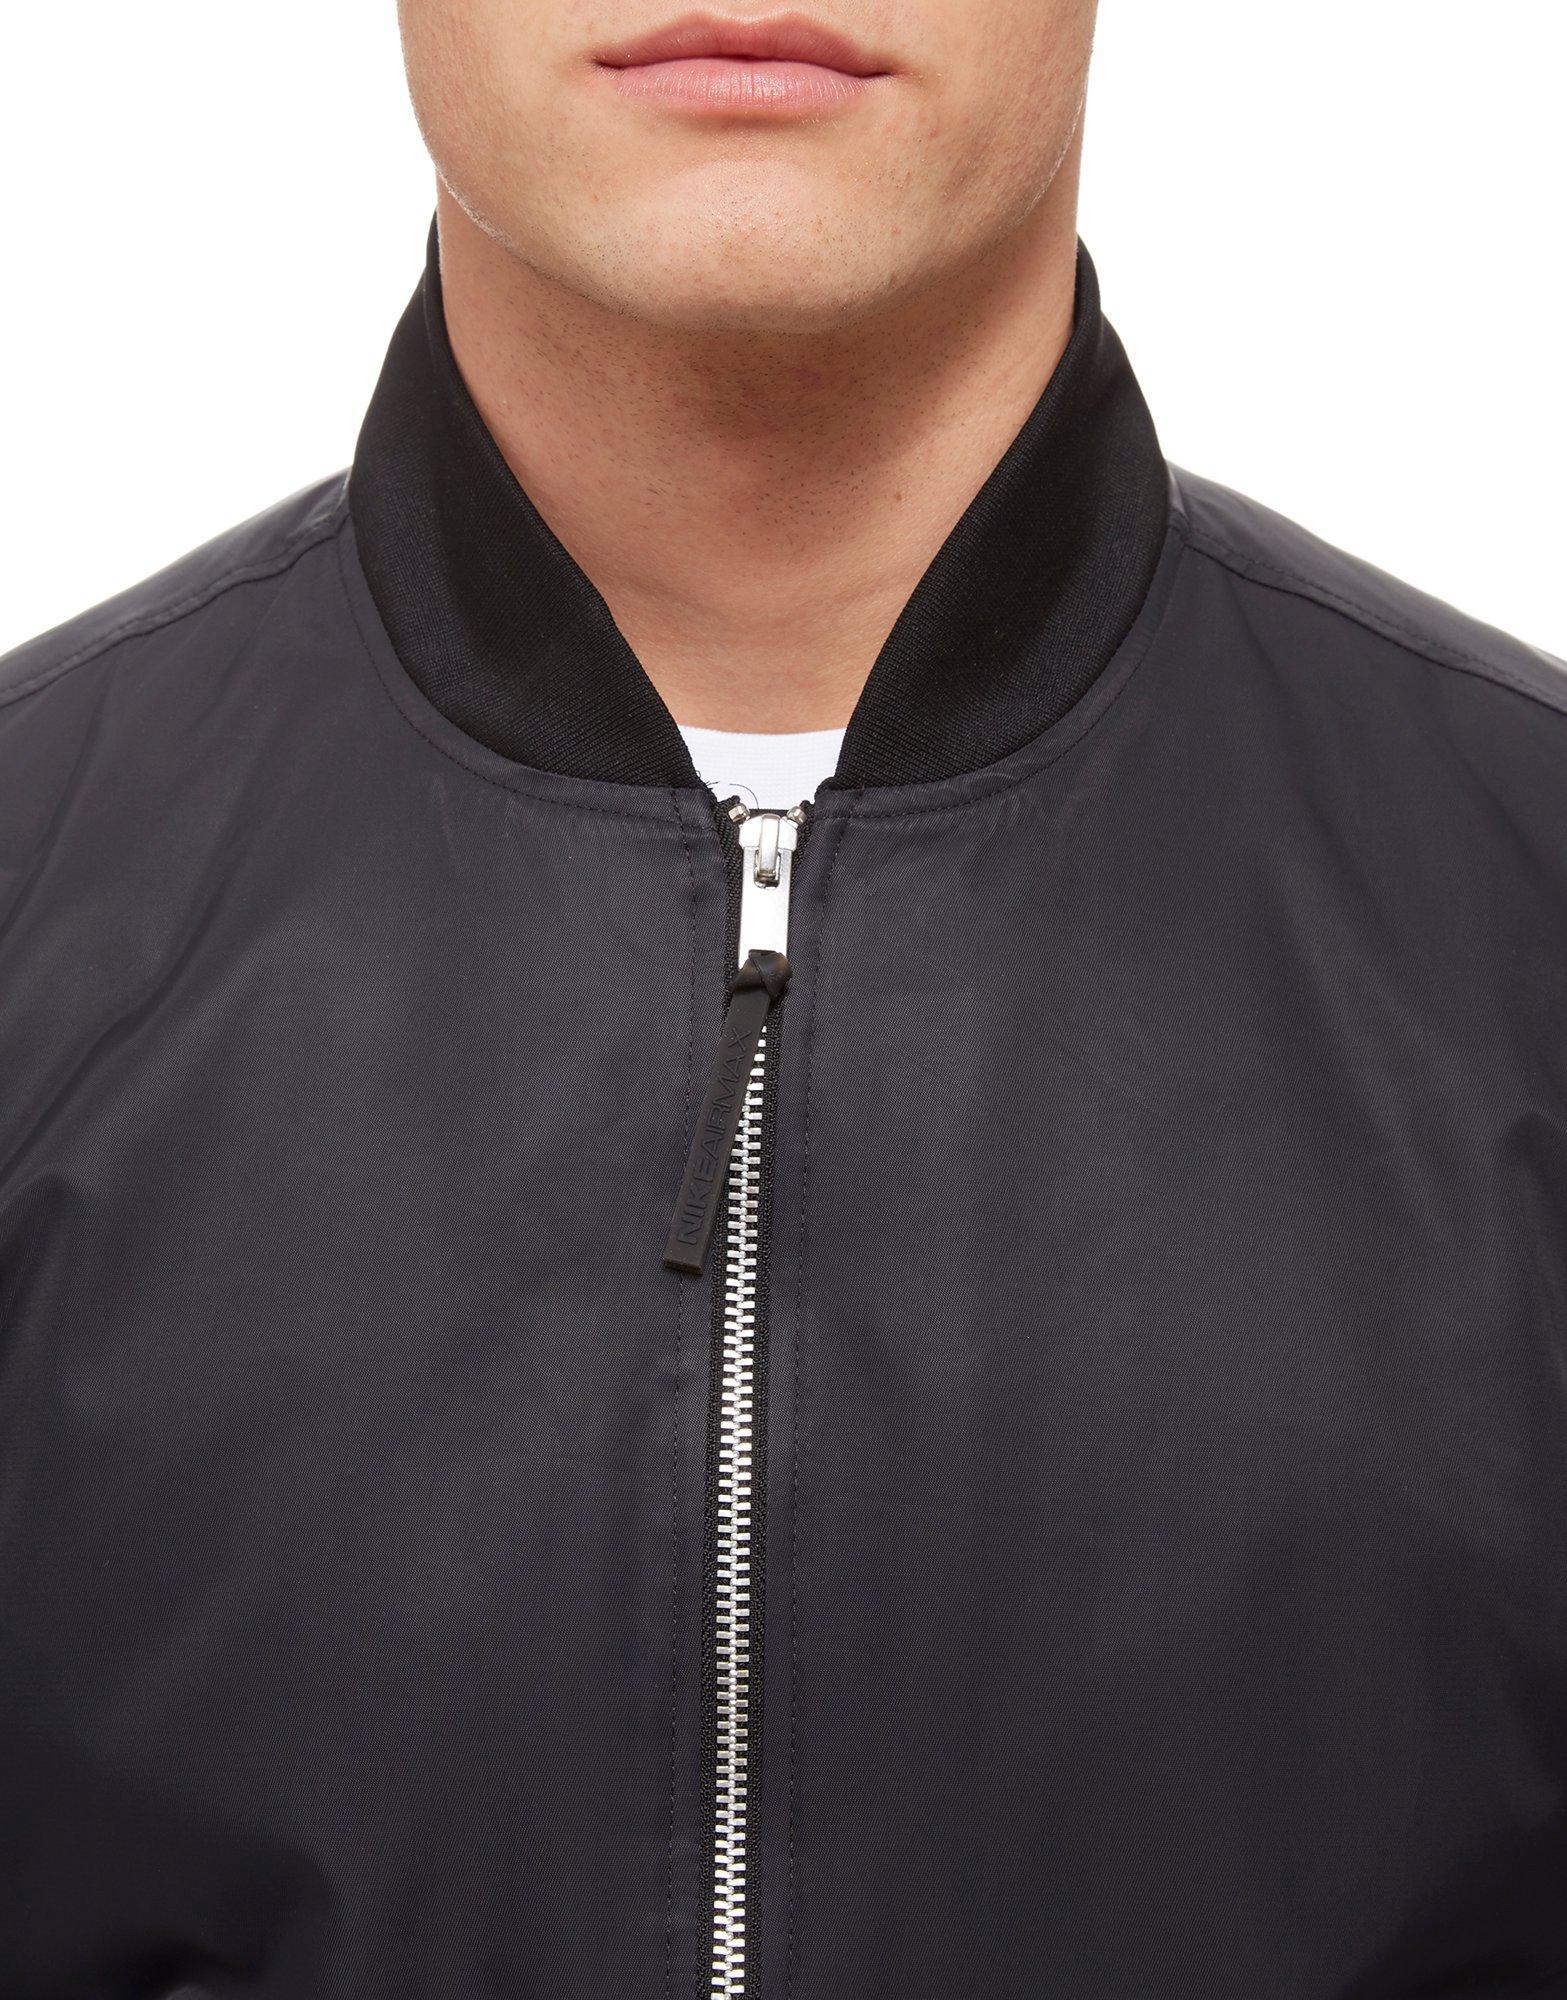 Nike Synthetic Air Max Woven Jacket in Black for Men - Lyst